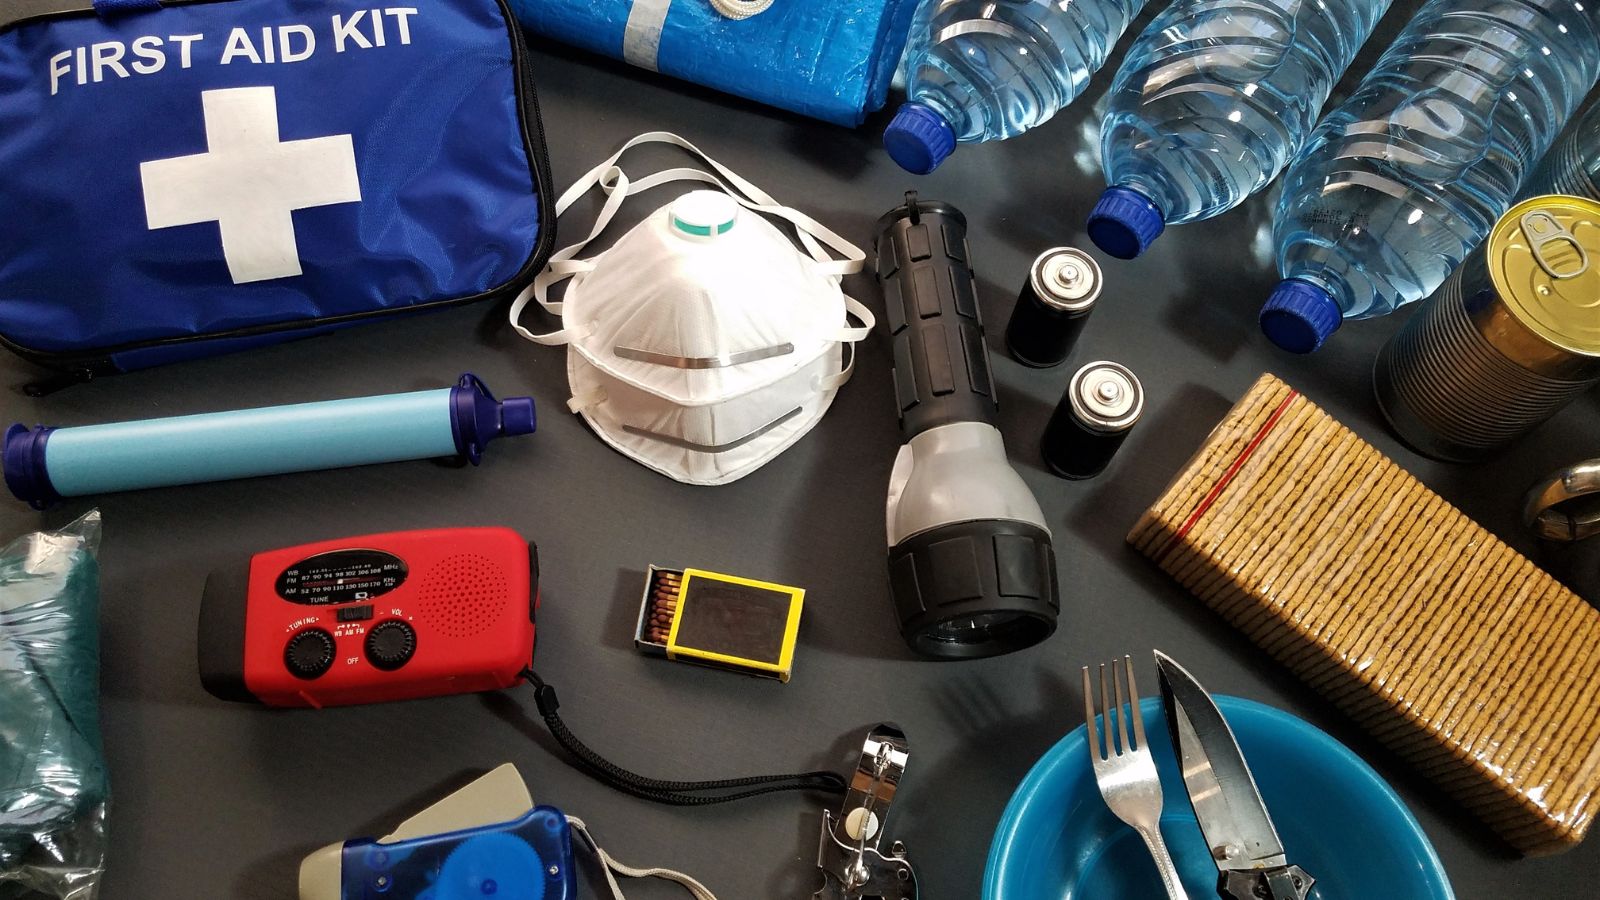 First aid kit, flashlight, masks, and other items for disaster preparedness